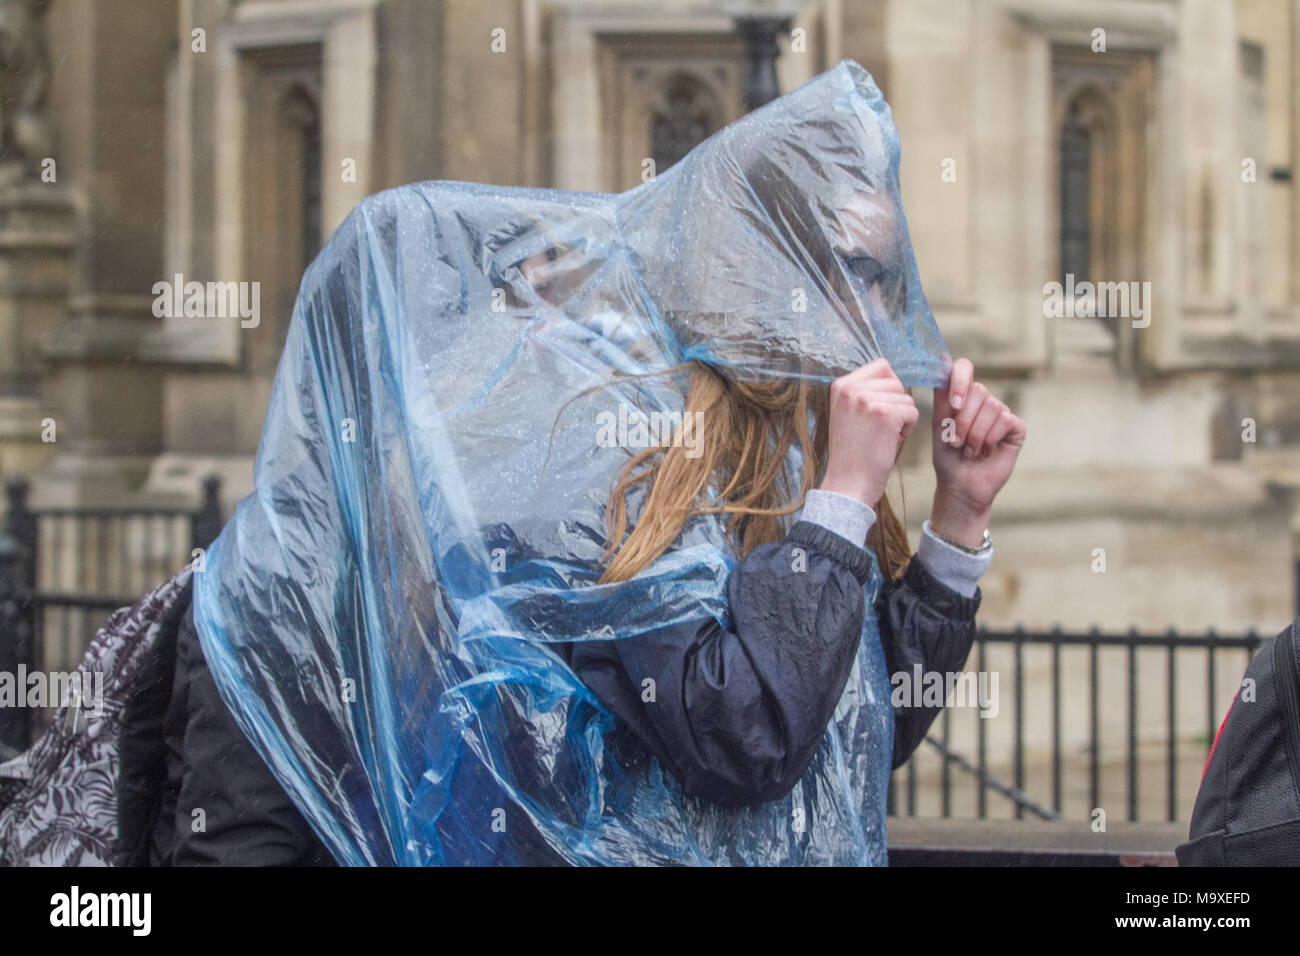 London, UK. 29th March 2018. Pedestrians share a rain poncho in Westminster  as London is hit by heavy rain showers Credit: amer ghazzal/Alamy Live News  Stock Photo - Alamy